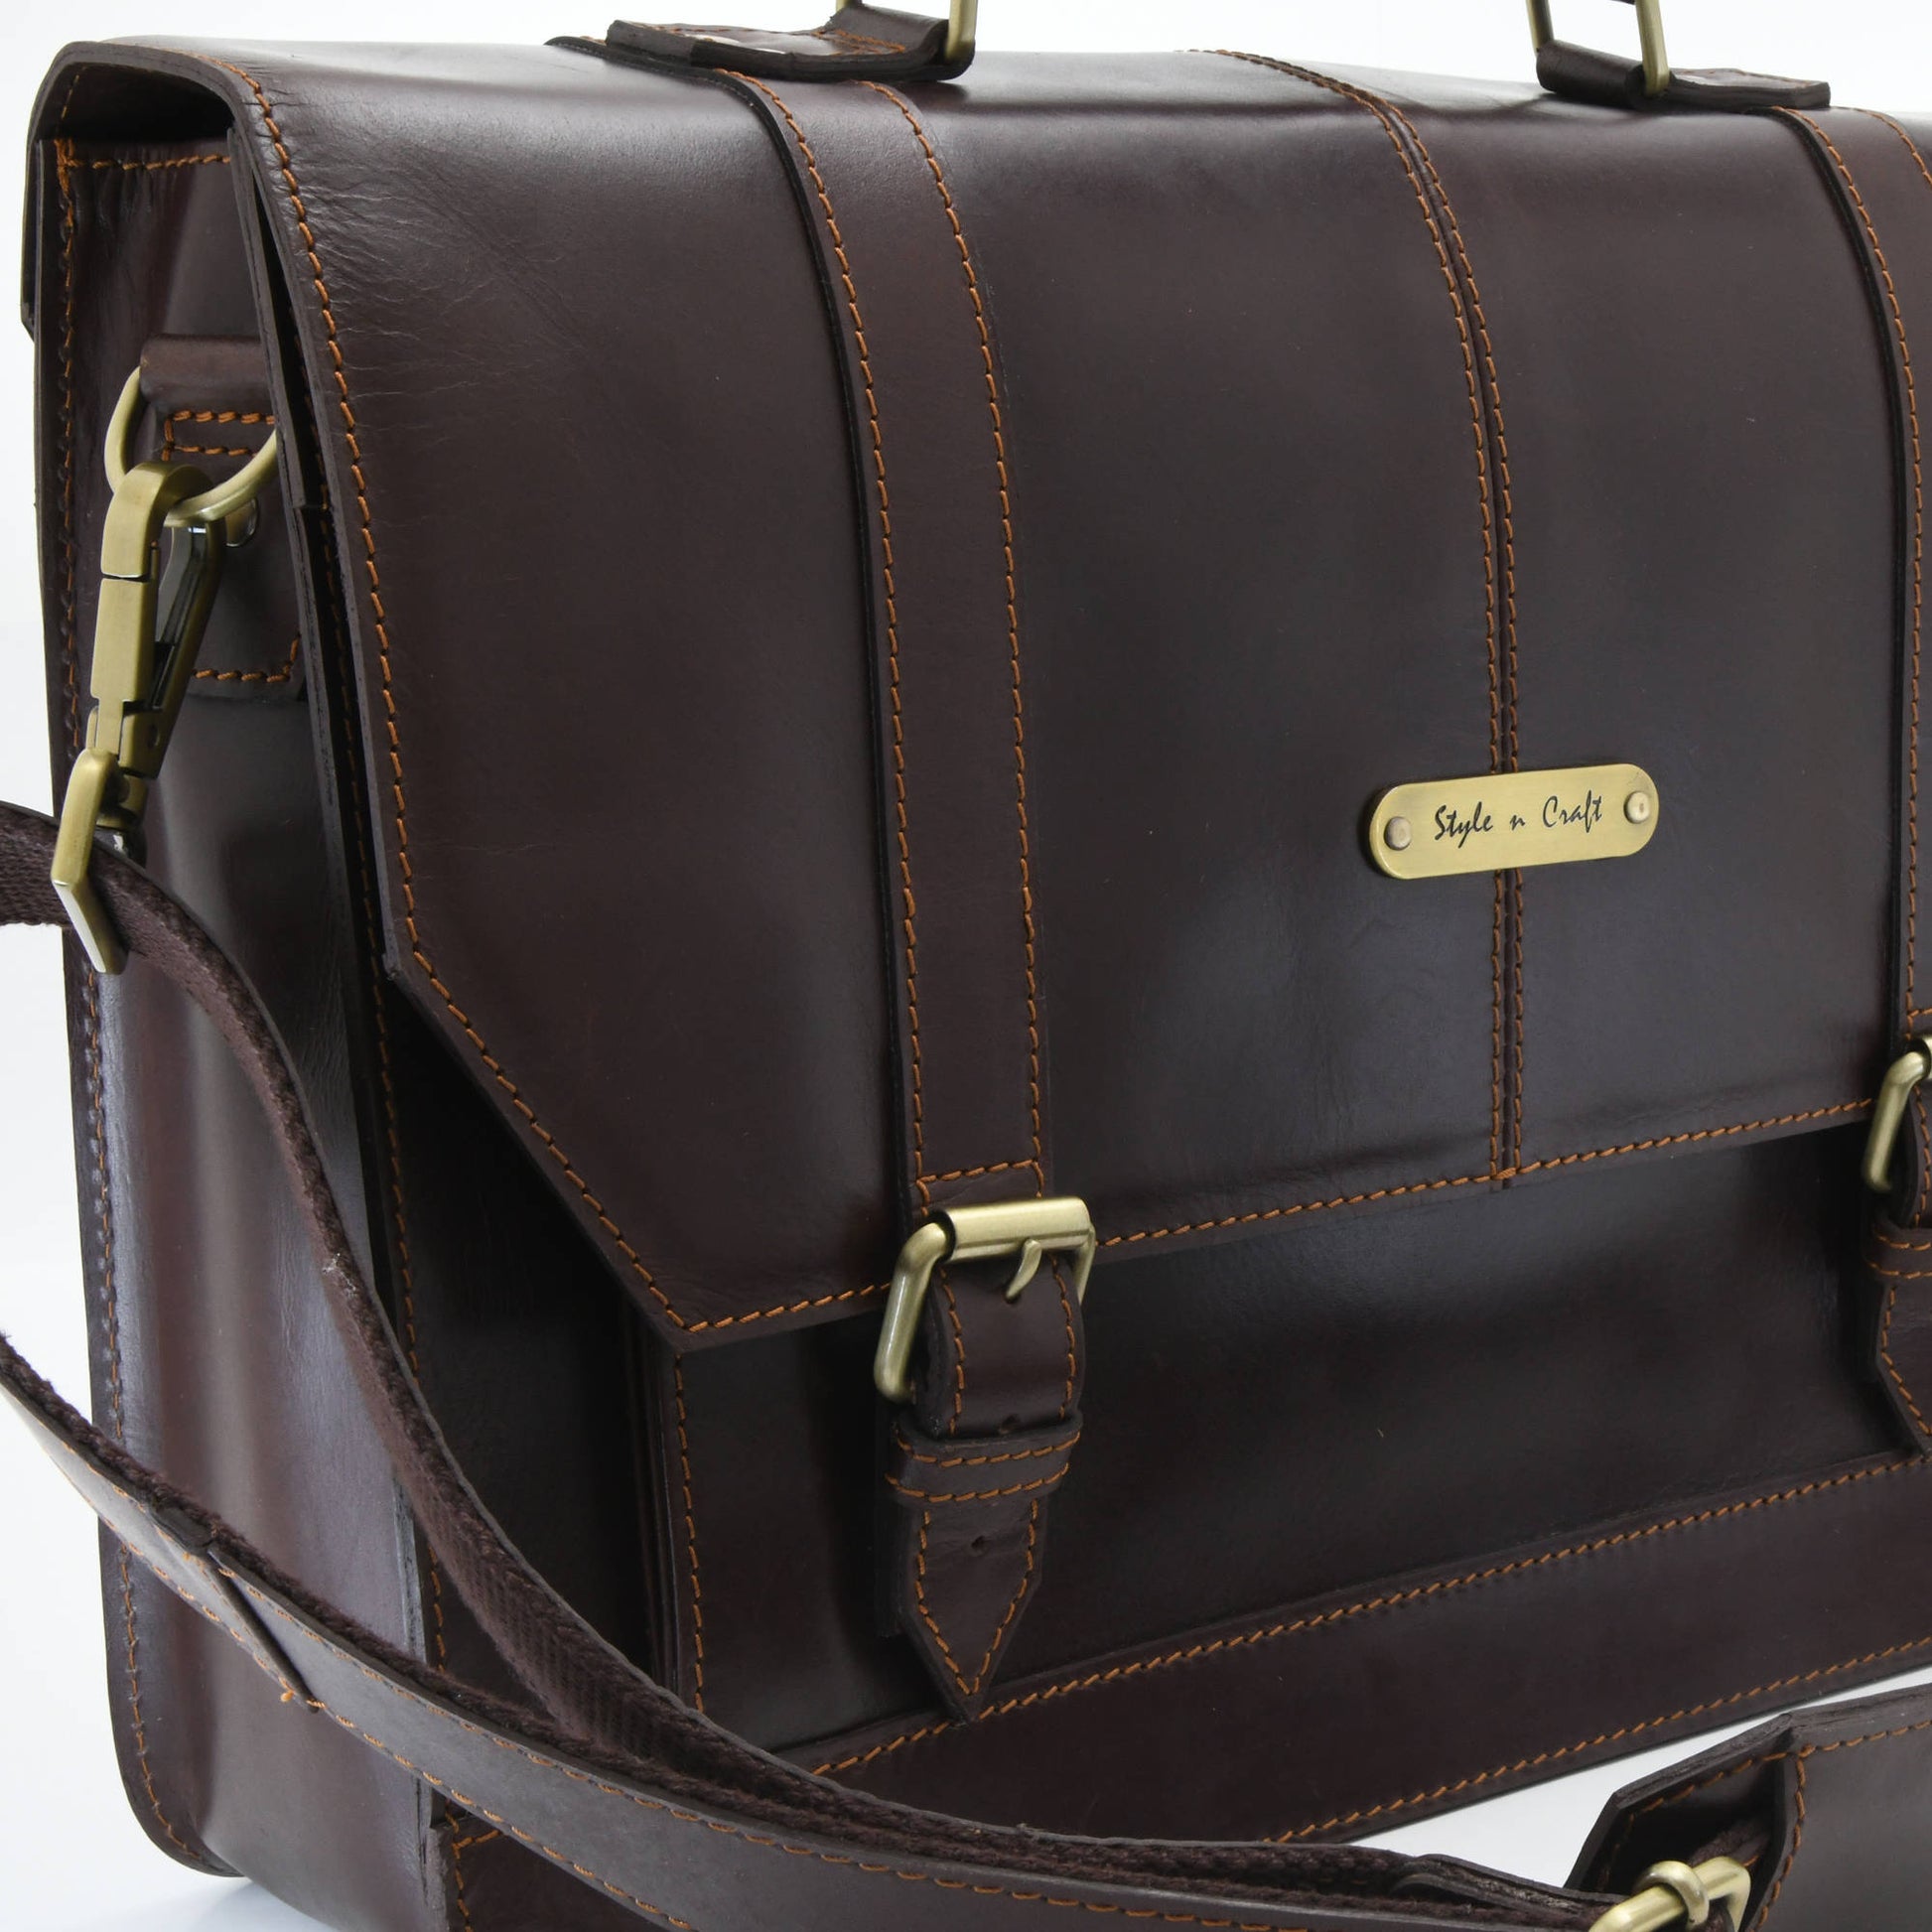 Style n Craft 392007 Portfolio Bag in Full Grain Dark Brown Leather - Front Angled Closeup View